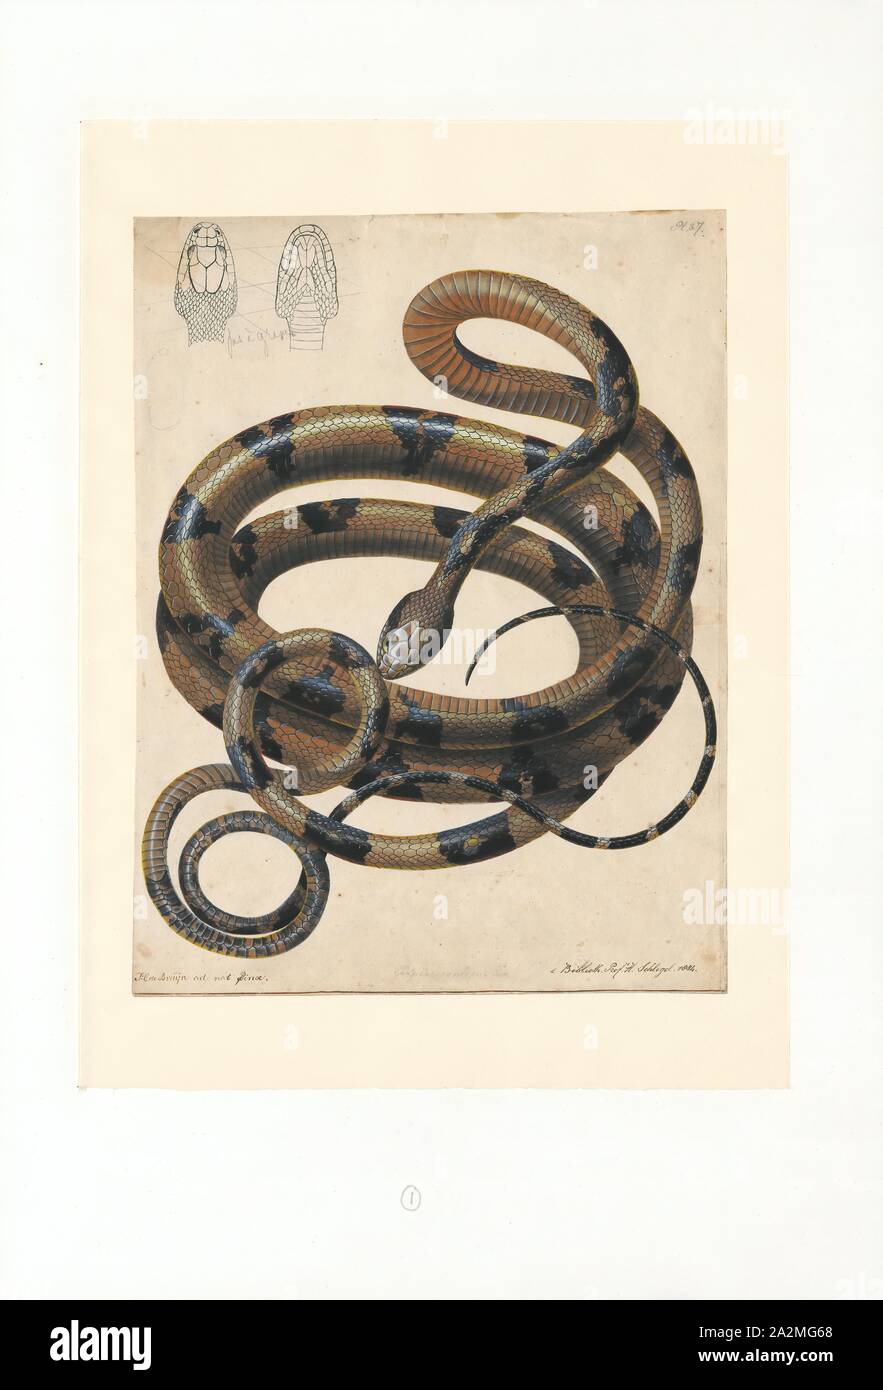 Dipsas cynodon, Print, Dipsas is a genus of nonvenomous New World snakes in the subfamily Dipsadinae of the family Colubridae. The genus Sibynomorphus has been moved here., 1802-1844 Stock Photo